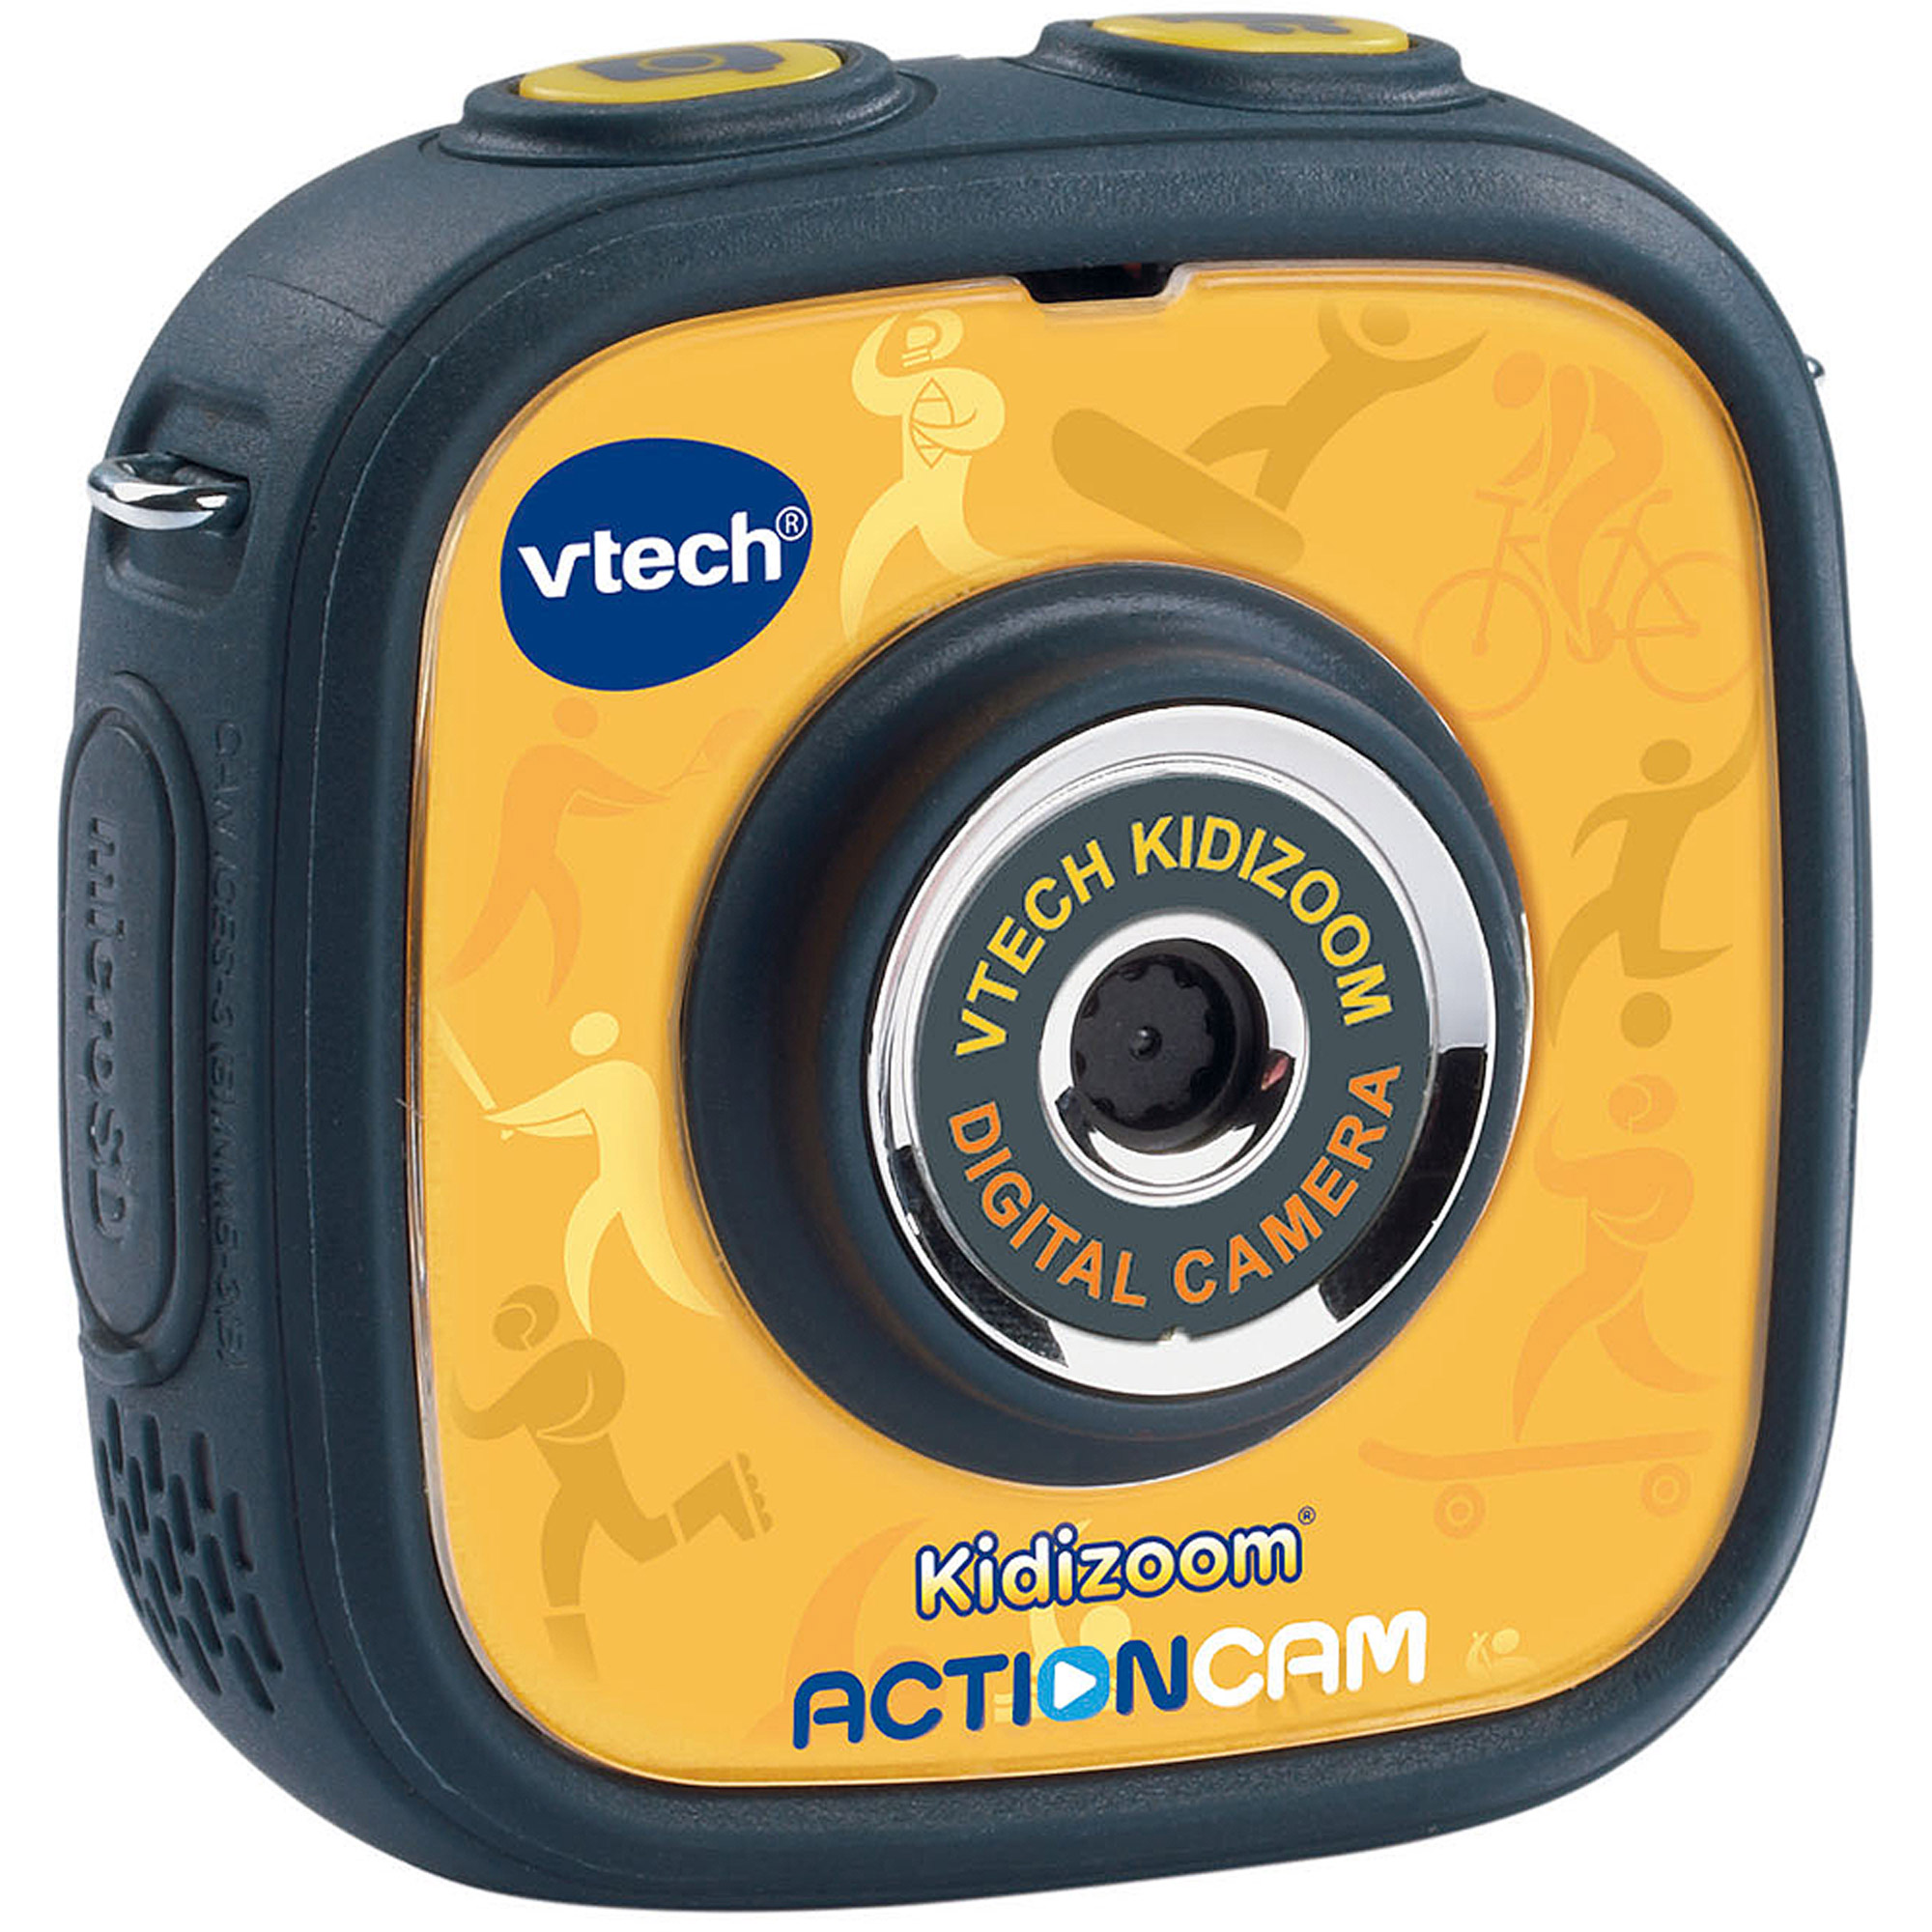 VTech Kidizoom Action Cam (Yellow/Black) - image 1 of 3